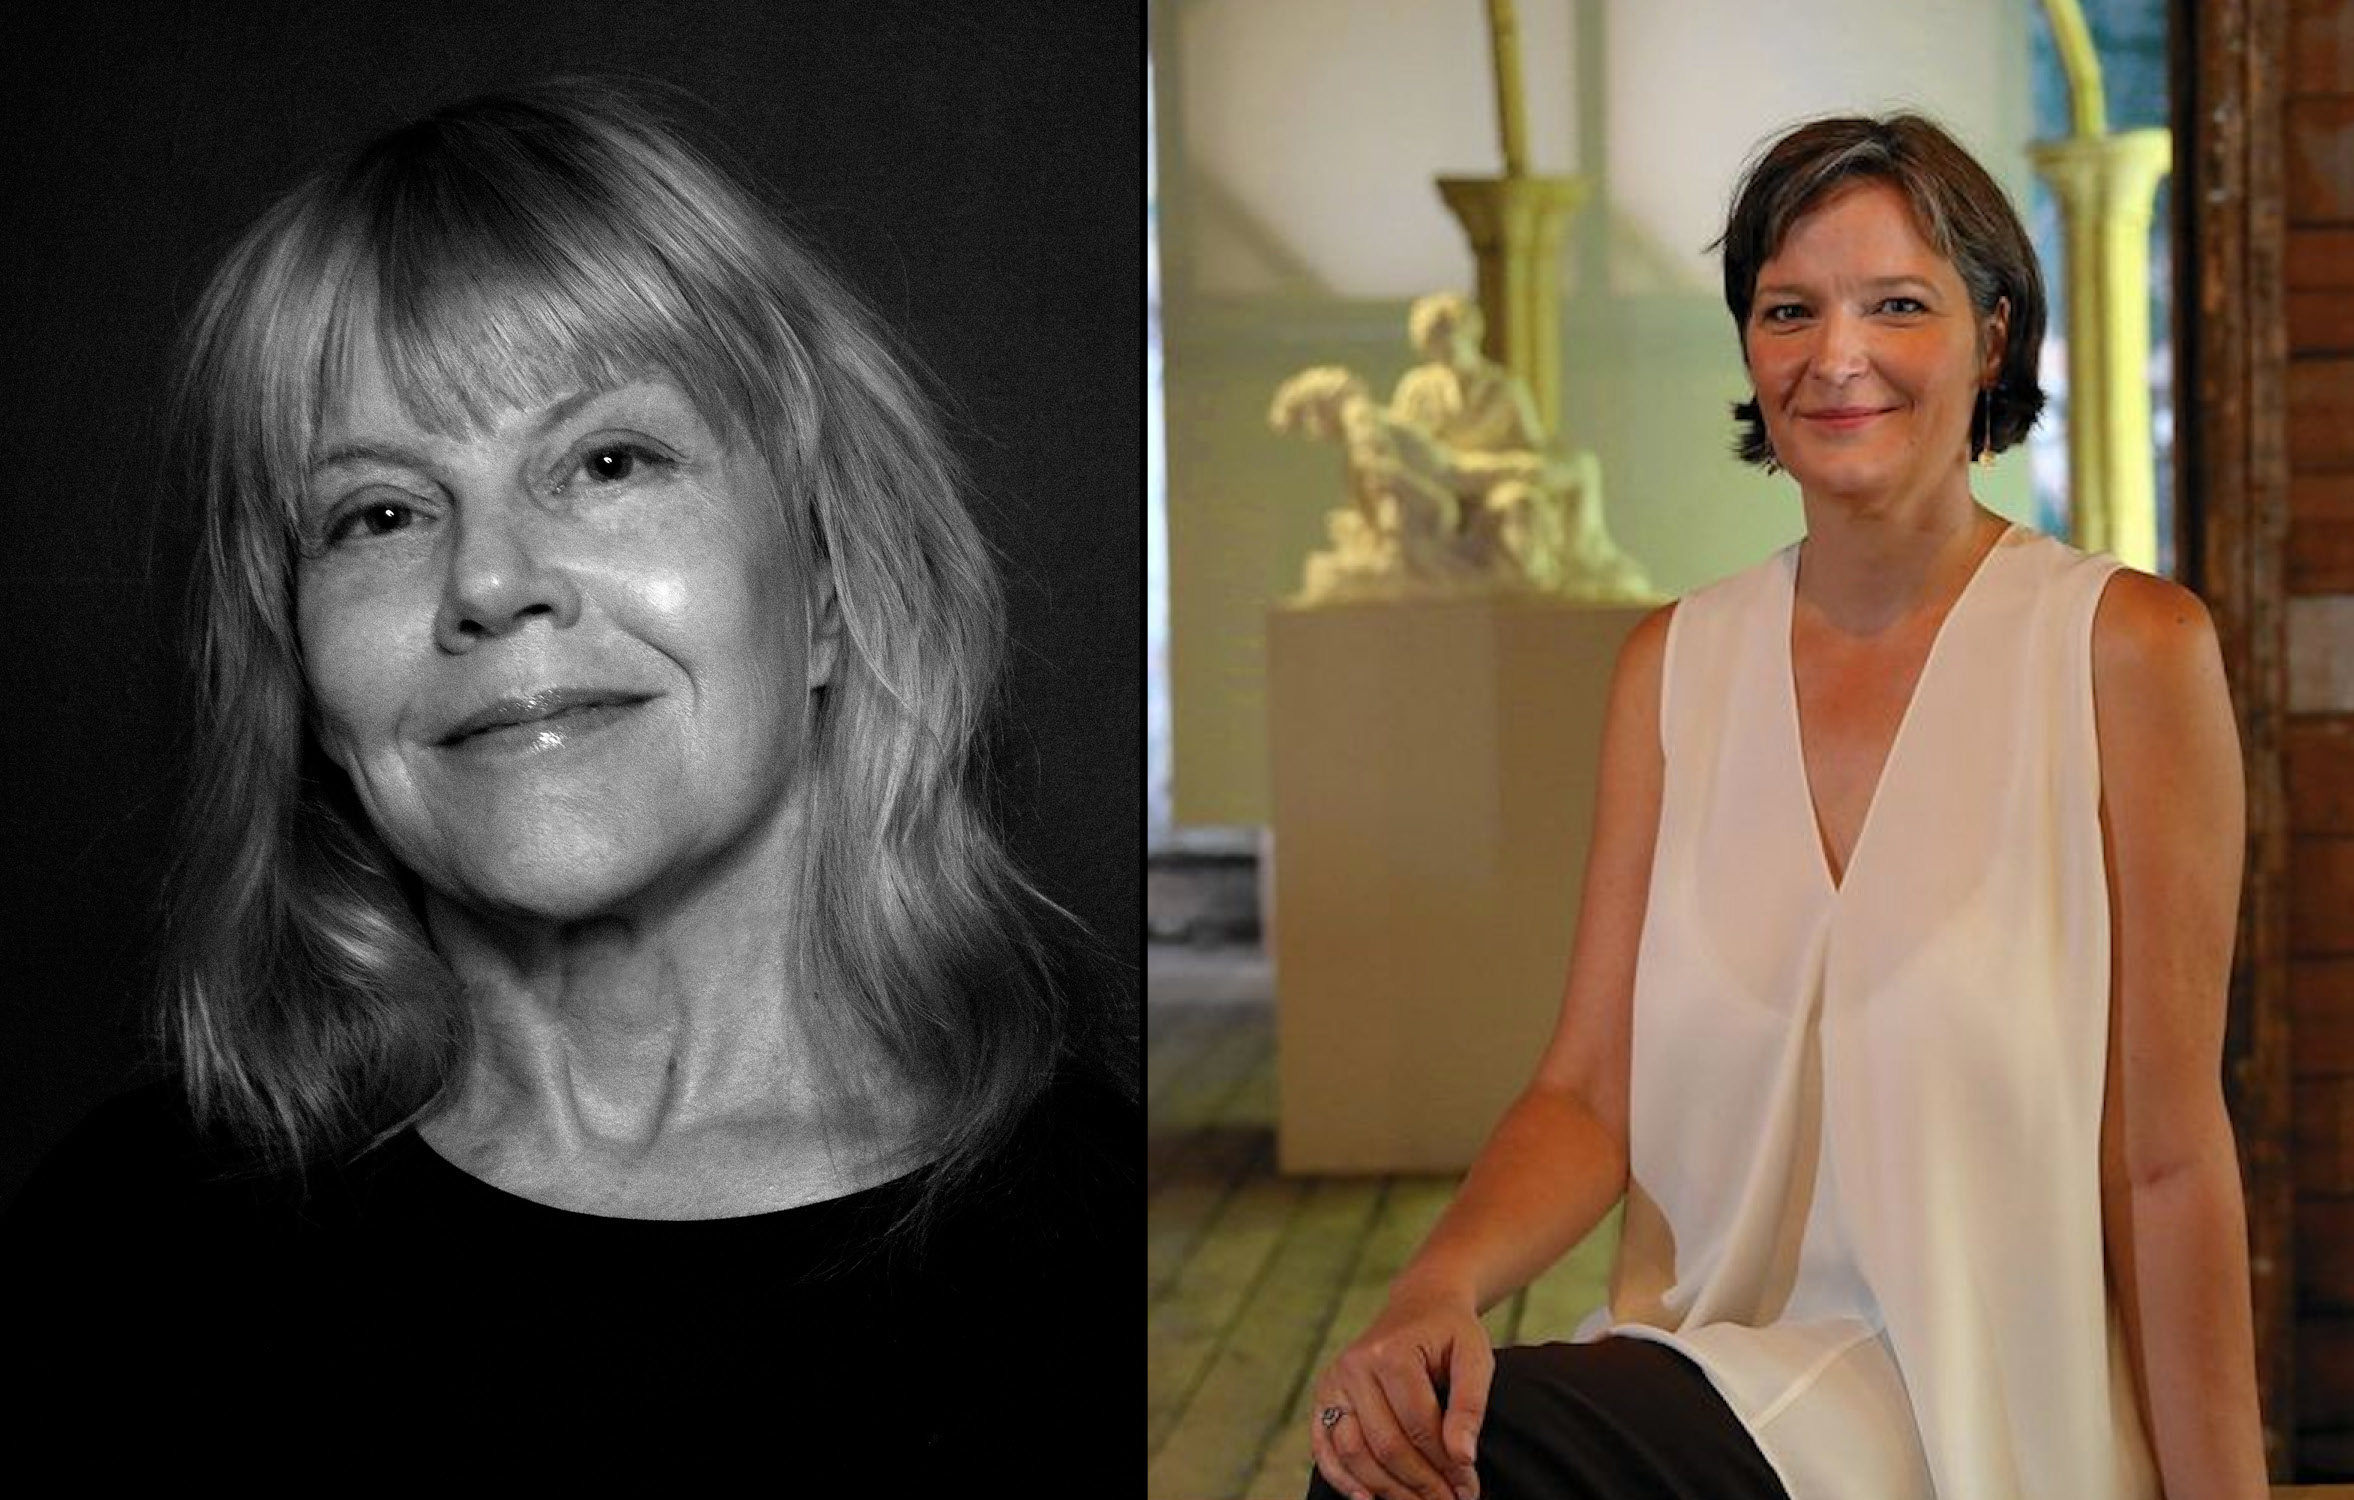 Headshot Images (L to R): Connie Noyes, Tricia Van Eck